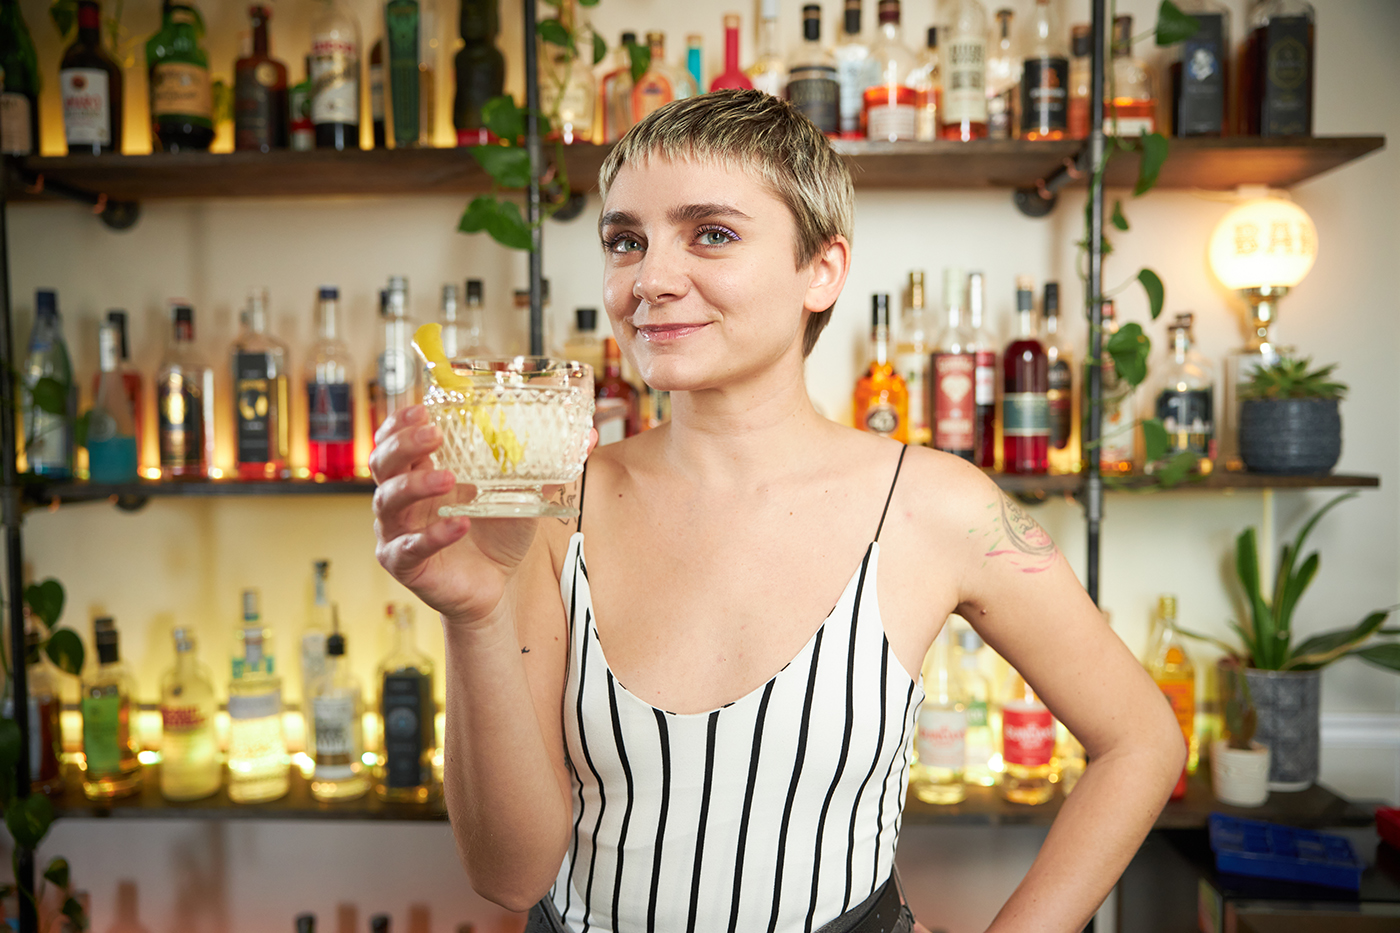 As with her approach to cocktail creation, Pace's fashion sense evinces a willingness to experiment and eschew convention.